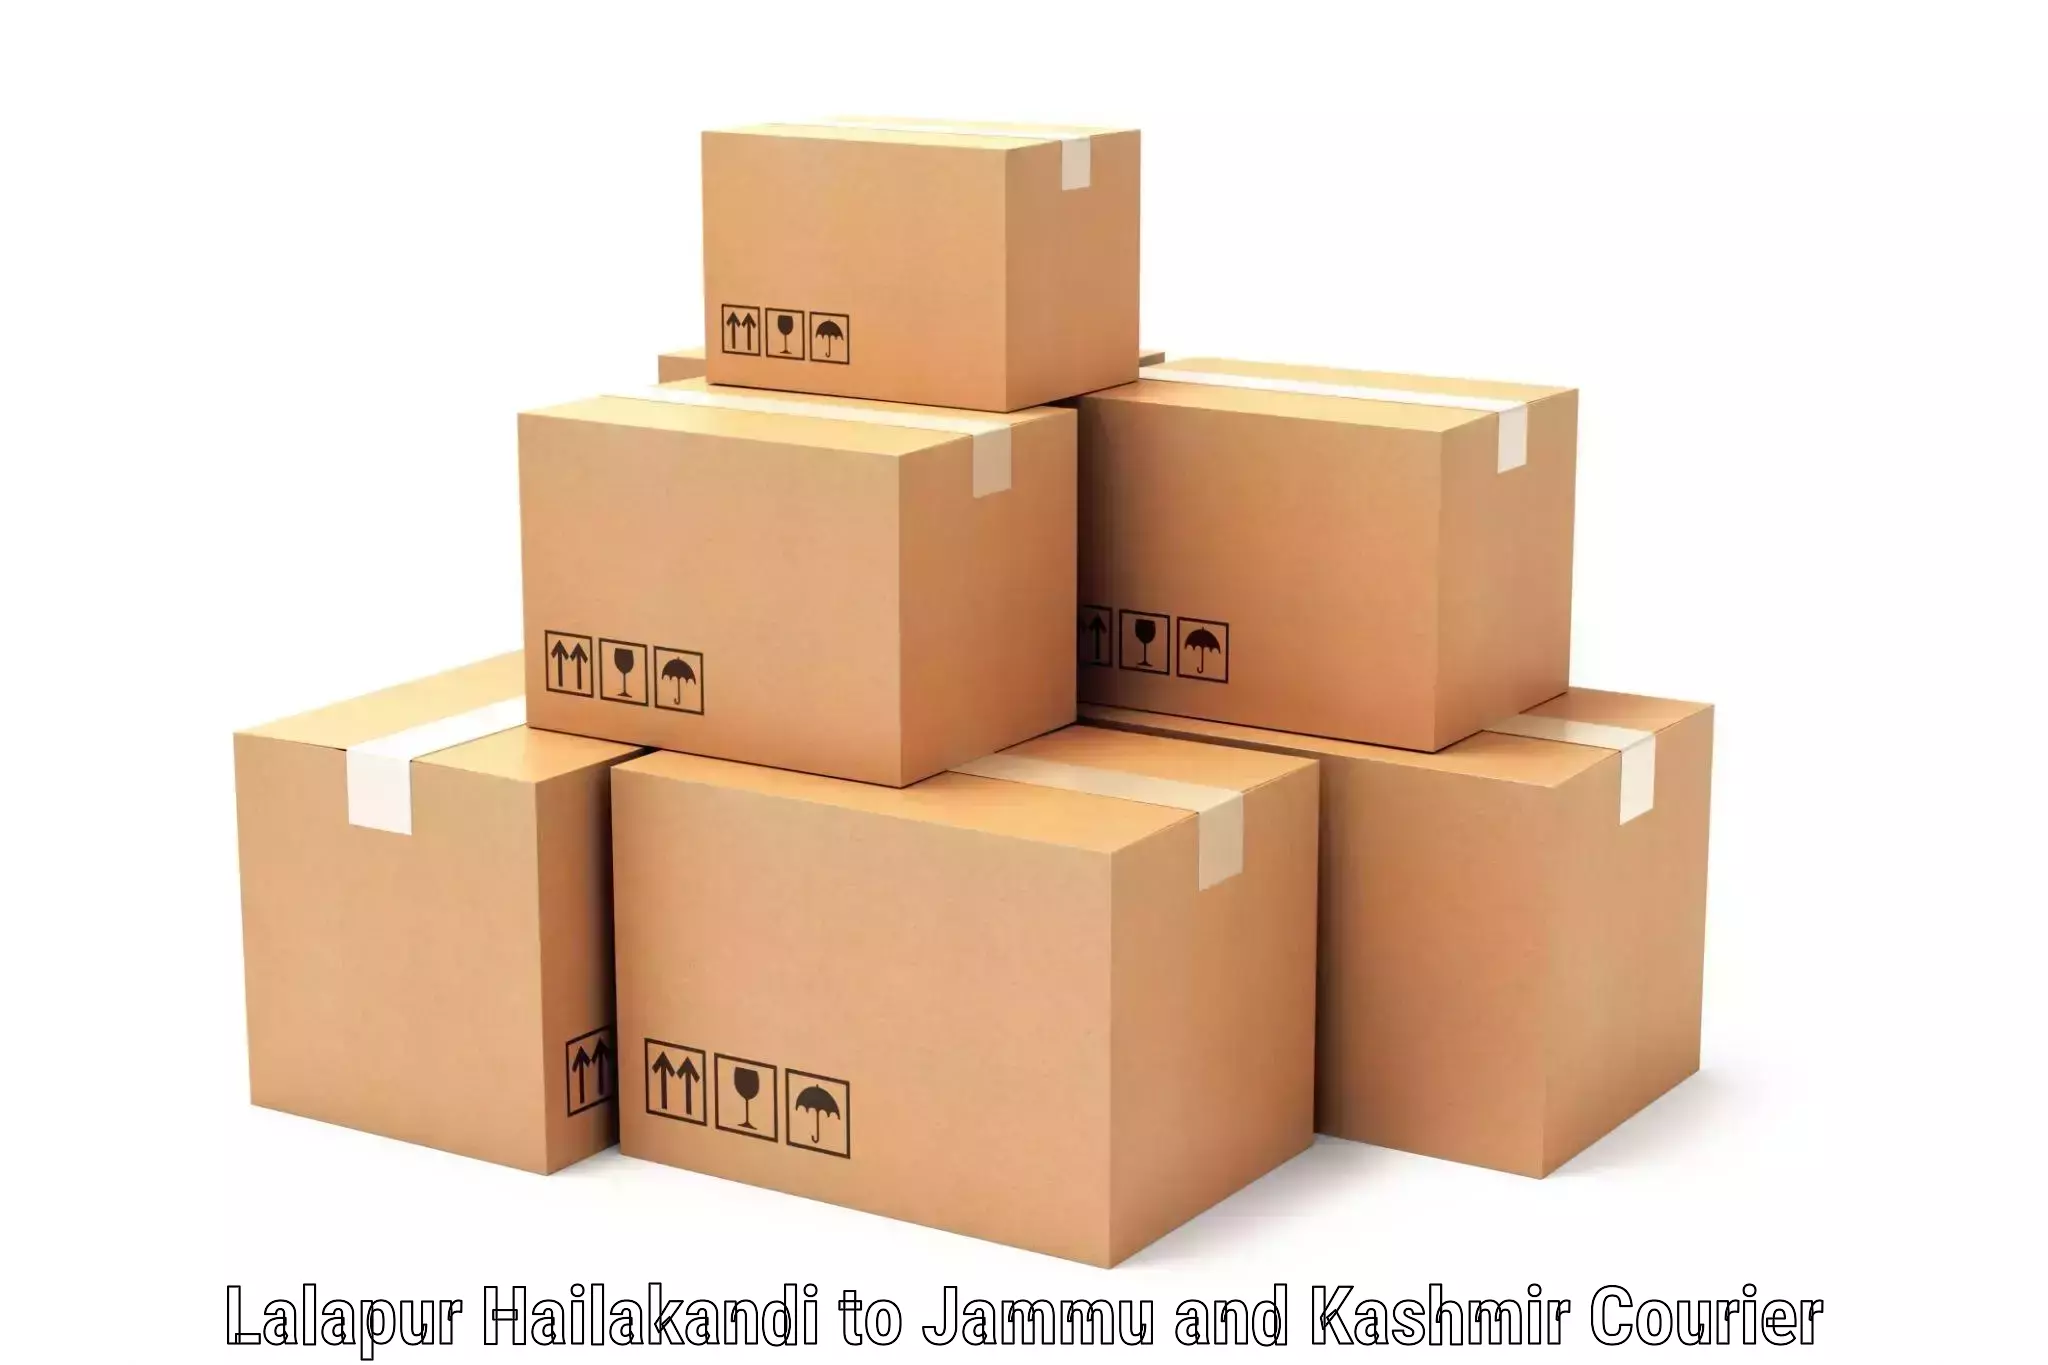 High-quality delivery services Lalapur Hailakandi to Rajouri